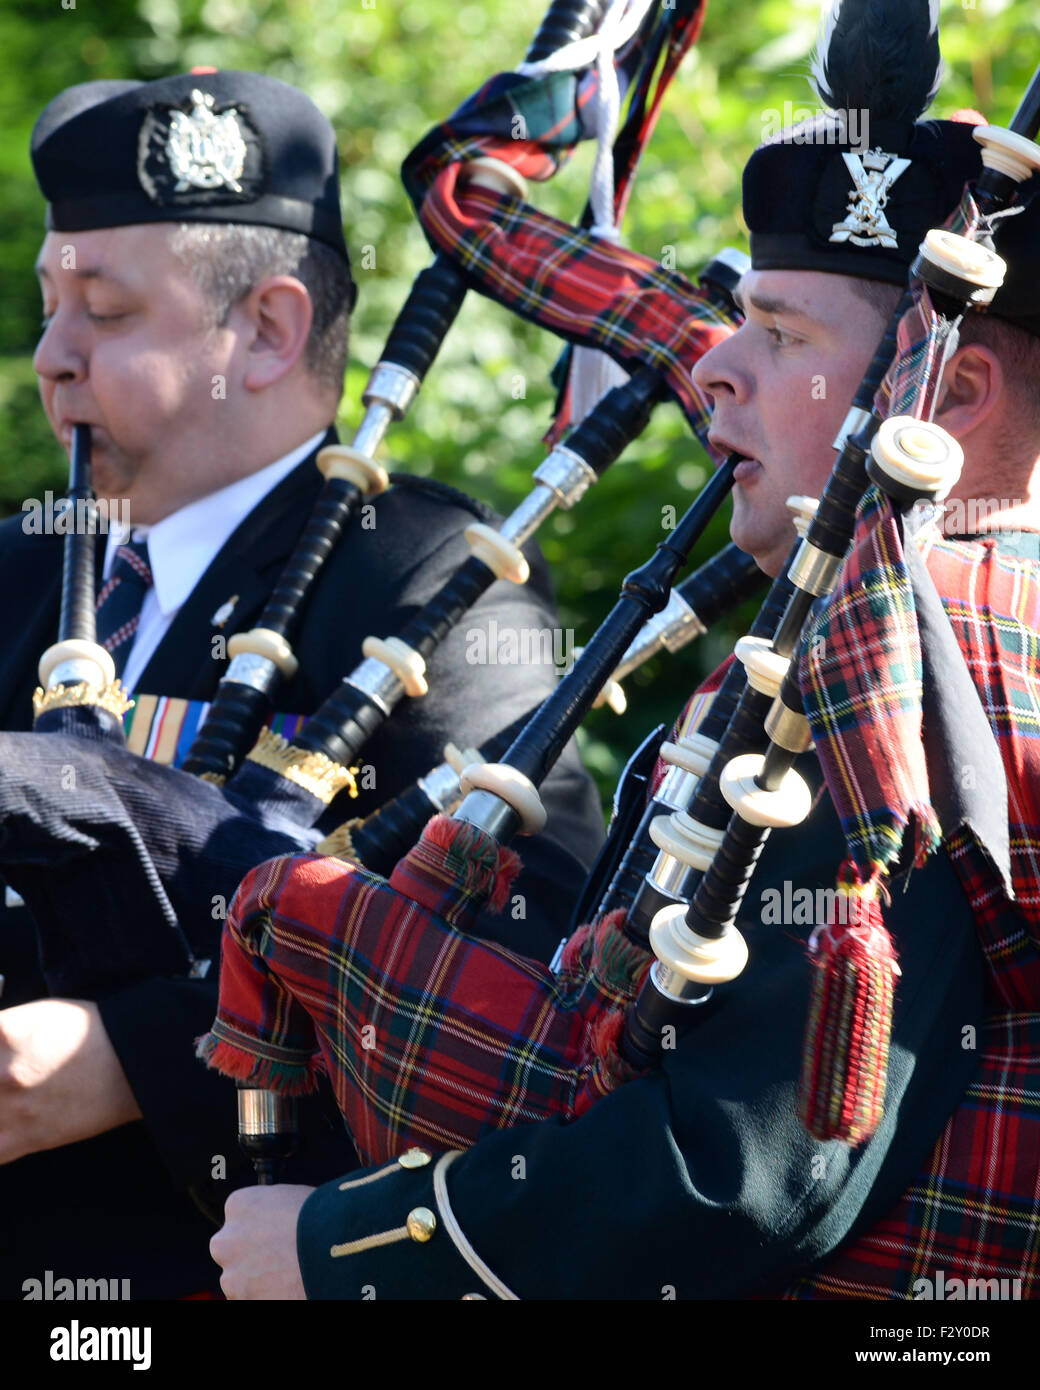 Swinton, UK. 25th Sep, 2015. Ex KOSB Kevin Turnbull of Selkirk plays alongside Corporal Ewan Jardine of the Royal Scottish Borderers.  The Laying of the Commerative VC Stone in the small Scottish Border village of Swinton to mark the 100th Anniversary of the award of the Victoria Cross to Piper Daniel Laidlaw for his actions whilst serving with the 7th Battalion of the King's Own Scottish Borderers.   Daniel Logan Laidlaw was born at Little Swinton, Berwickshire on 26 July 1875 and joined the Army in 1896. Stock Photo